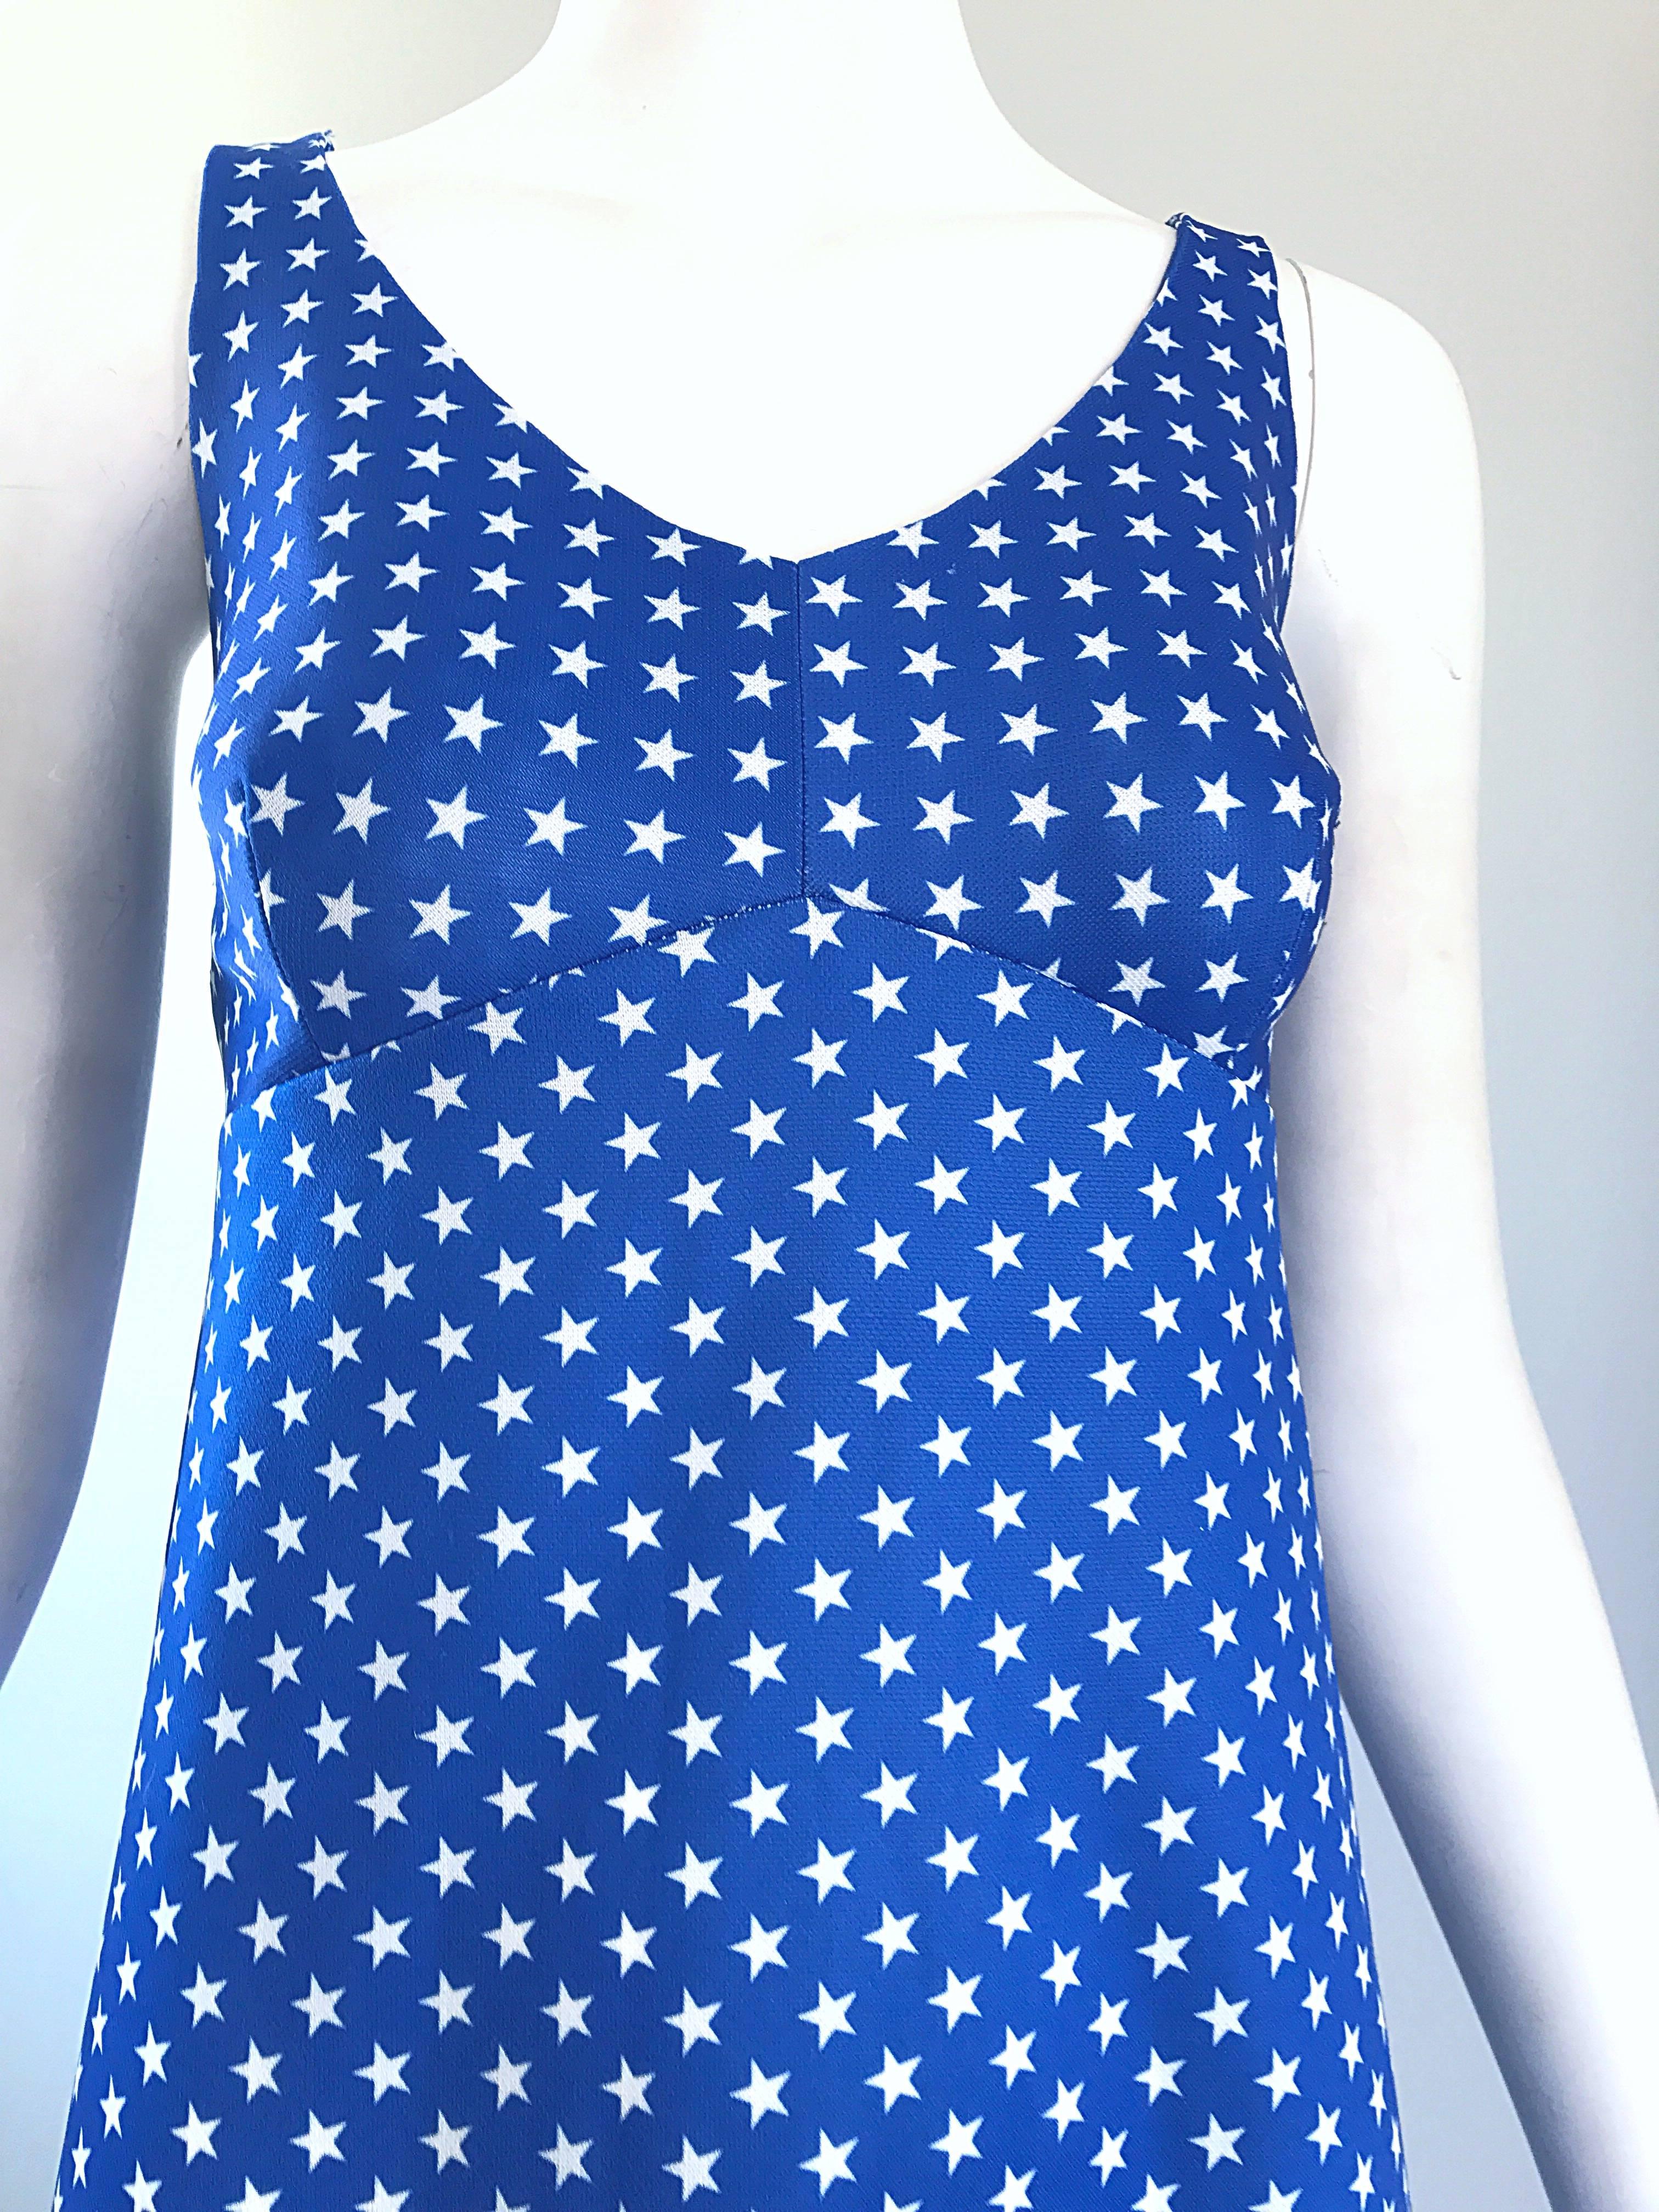 Amazing 1960s royal blue and white star print A - Line dress! Hidden zipper up th eback with hook-and-eye closure. Great with boots, wedges, sandals, heels, flats or boots. Looks fantastic on! In great condition. 
Approximately Size Small- Medium